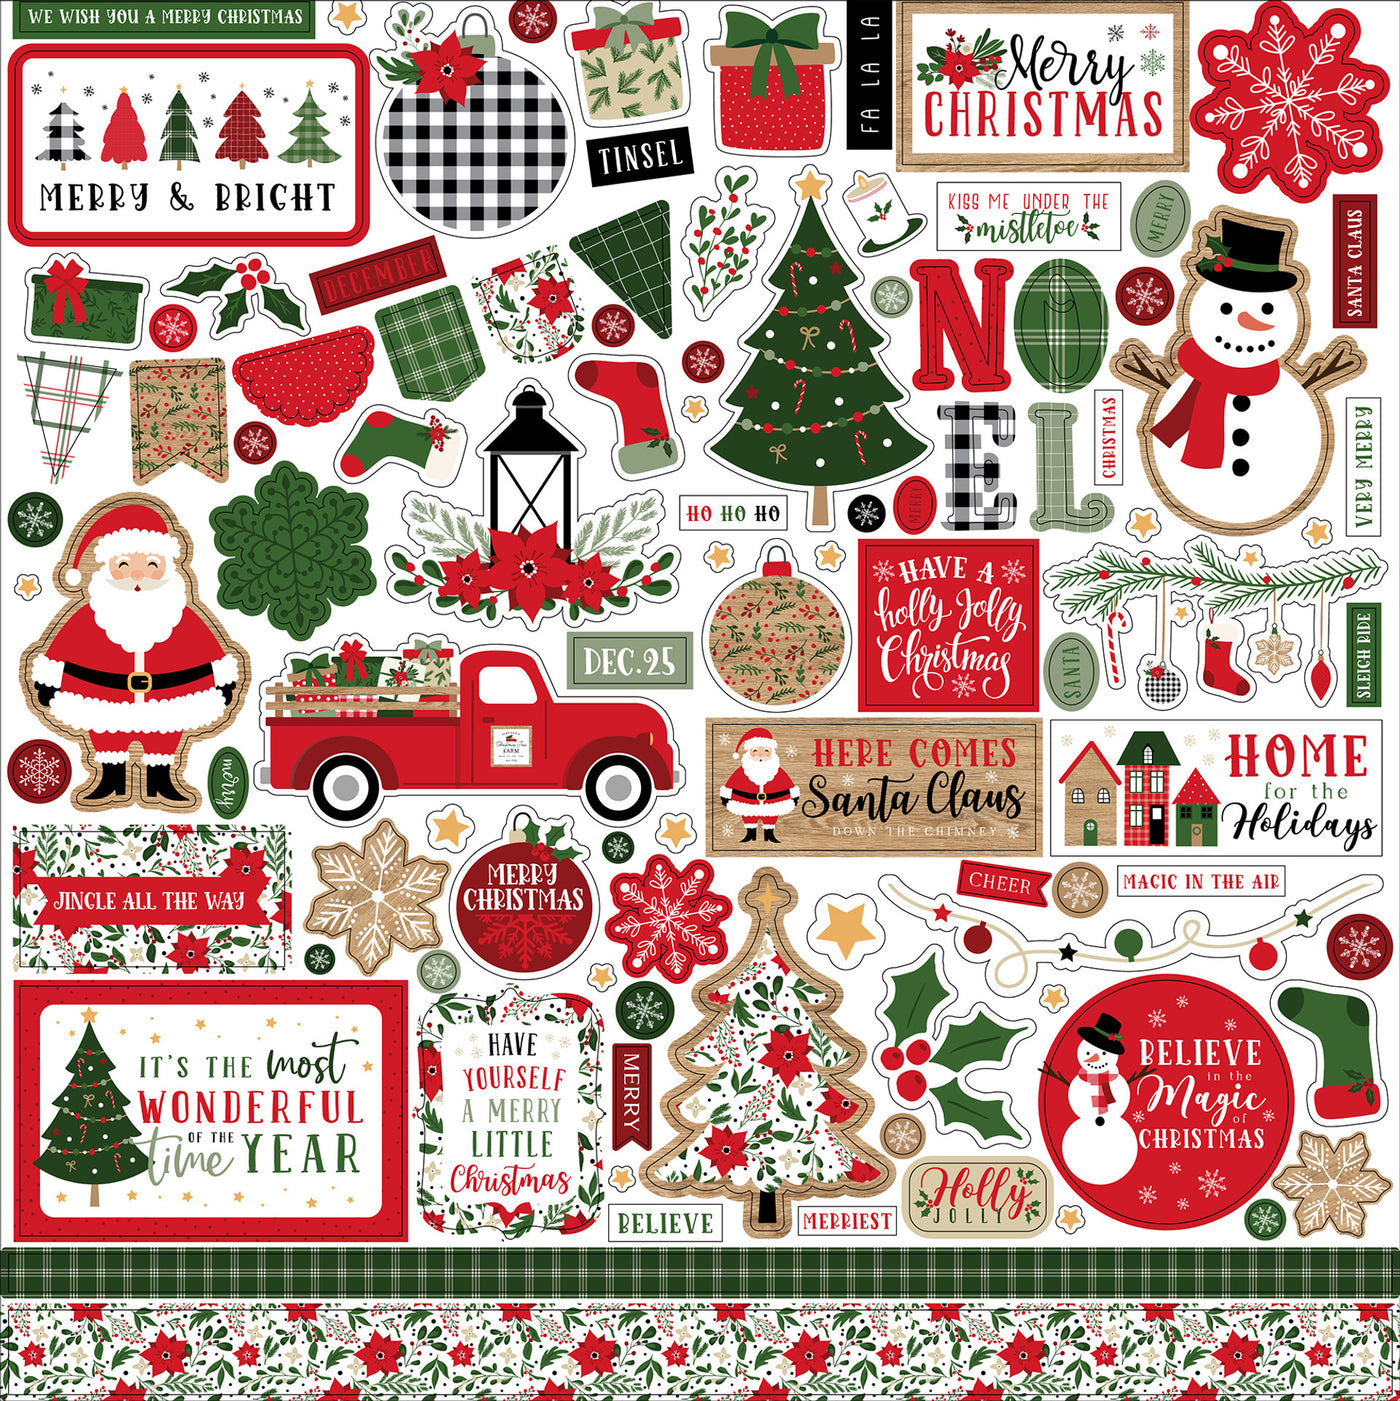 Jingle All The Way Elements 12" x 12" Cardstock Stickers from the Jingle All The Way Collection by Echo Park. These stickers include Santa, snowmen, Christmas trees, ornaments, banners, borders, and more!  